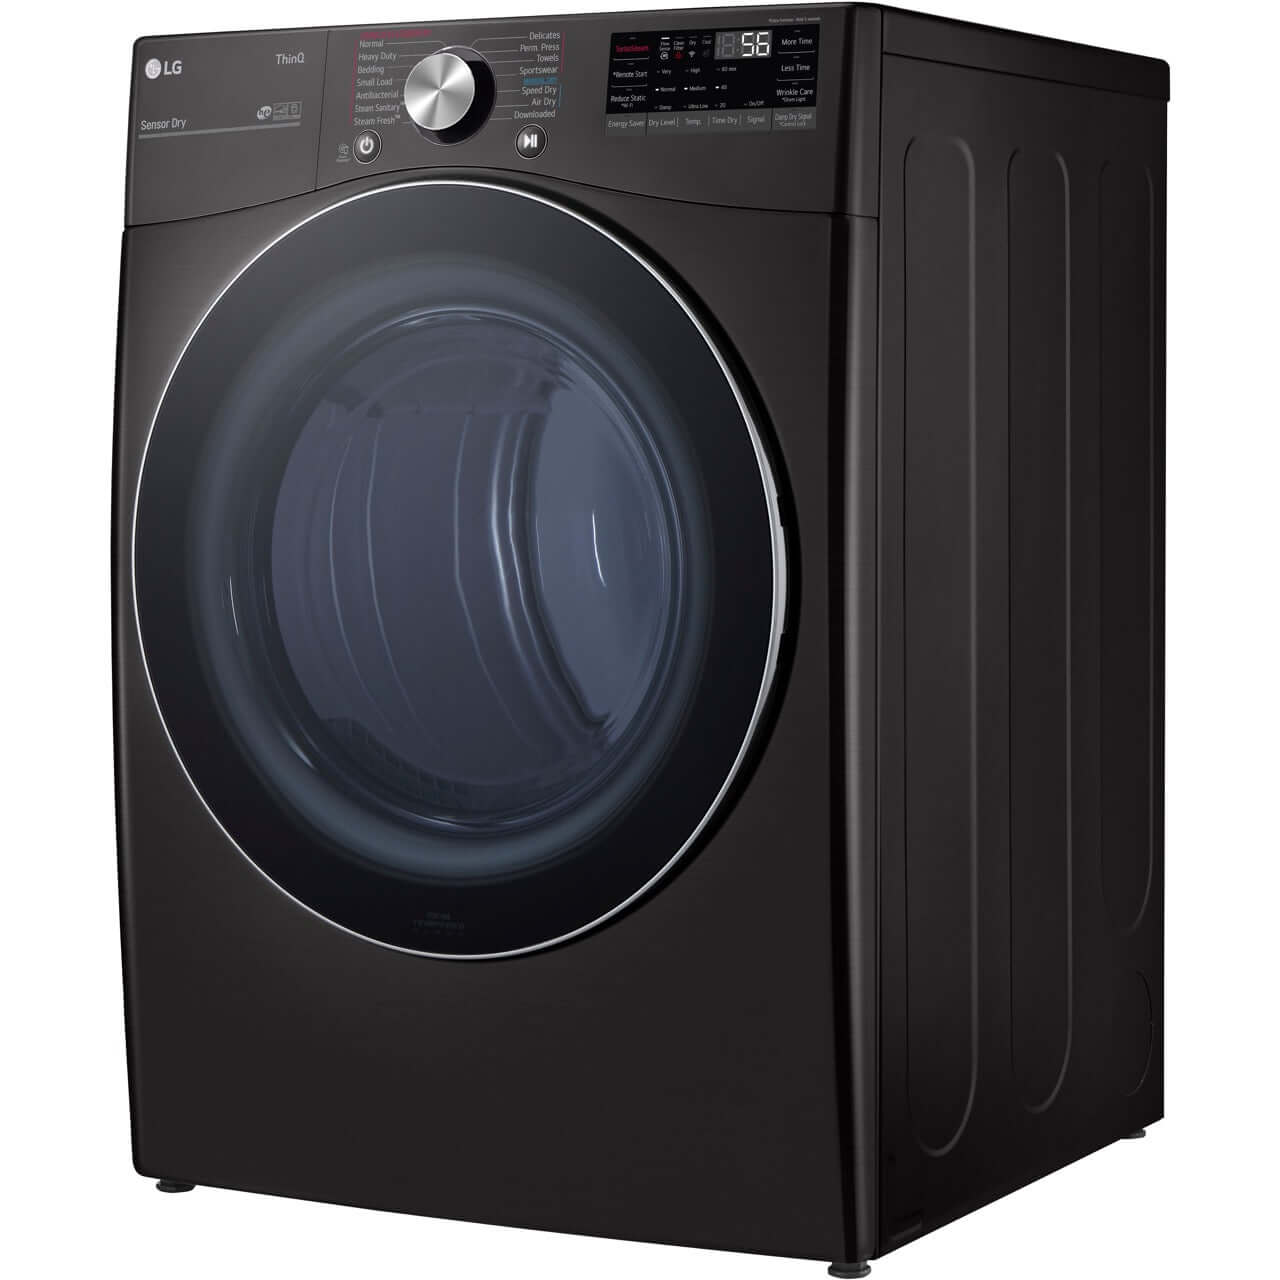 LG 27 In. 7.4-Cu. Ft. Front Load Gas Dryer with TurboSteam and Built-In Intelligence in Black Steel (DLGX4201B)